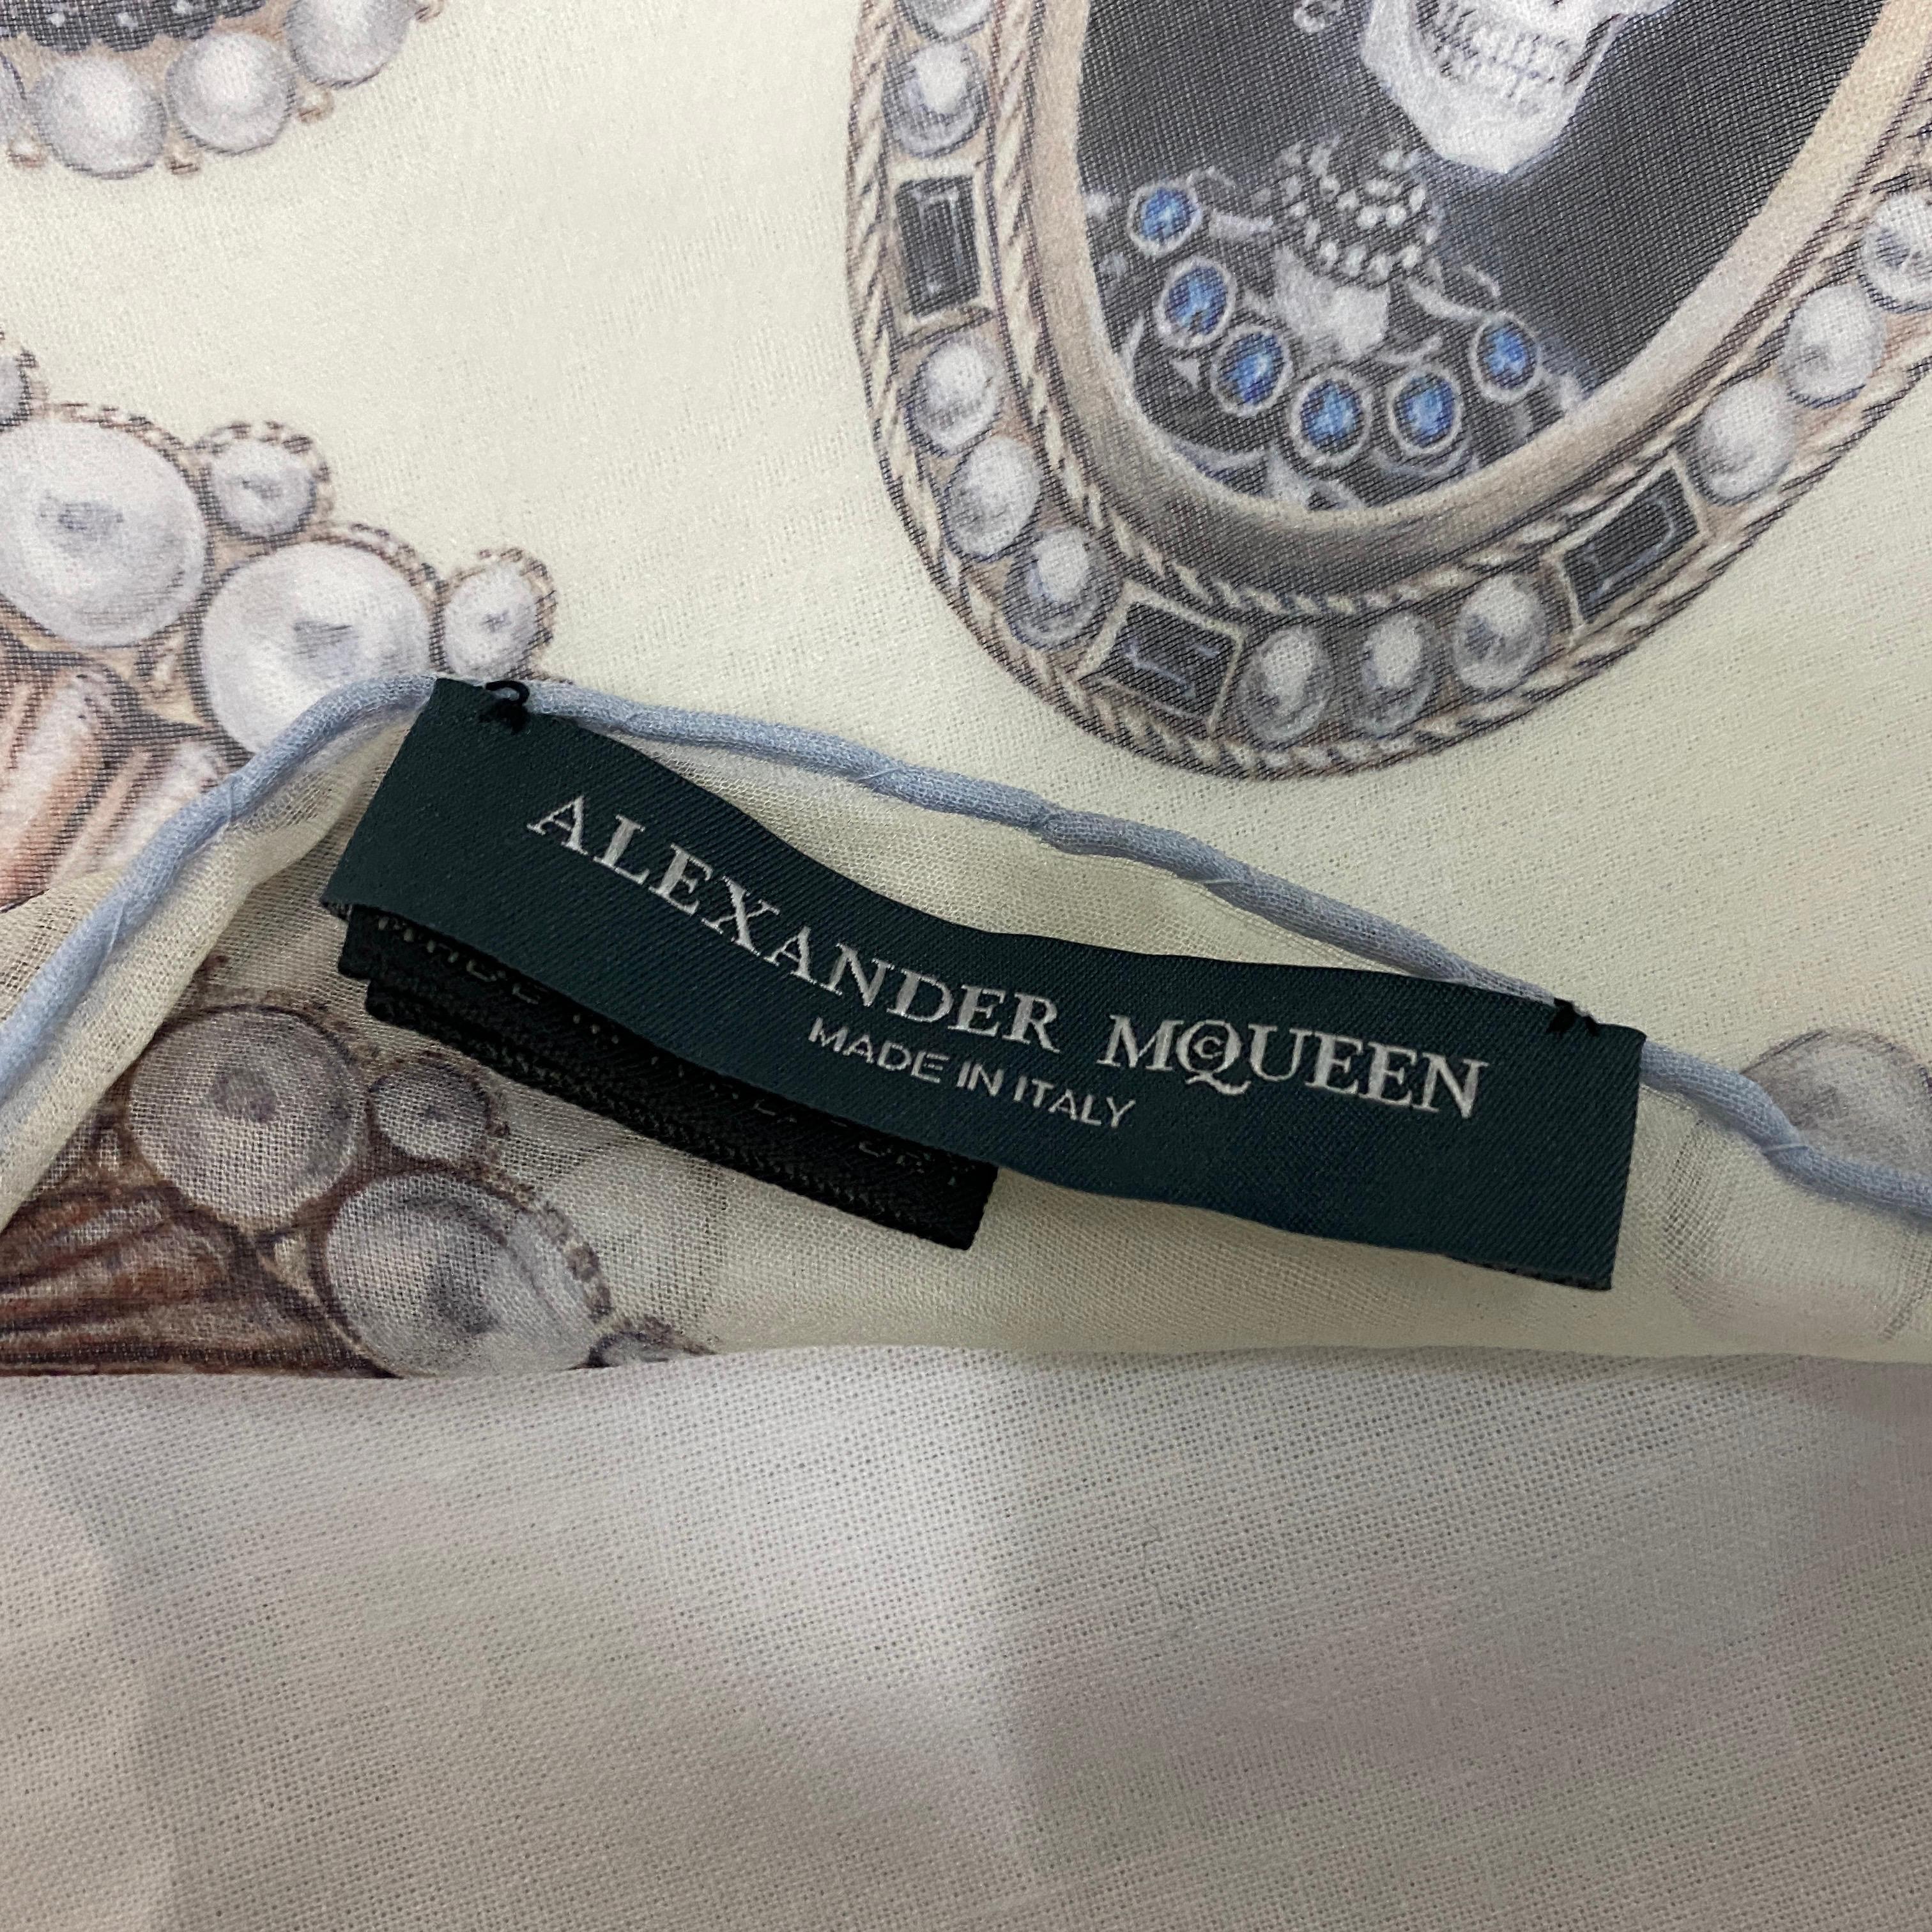 Iconic White Silk Scarf by Alexander McQueen, with central Skull 2